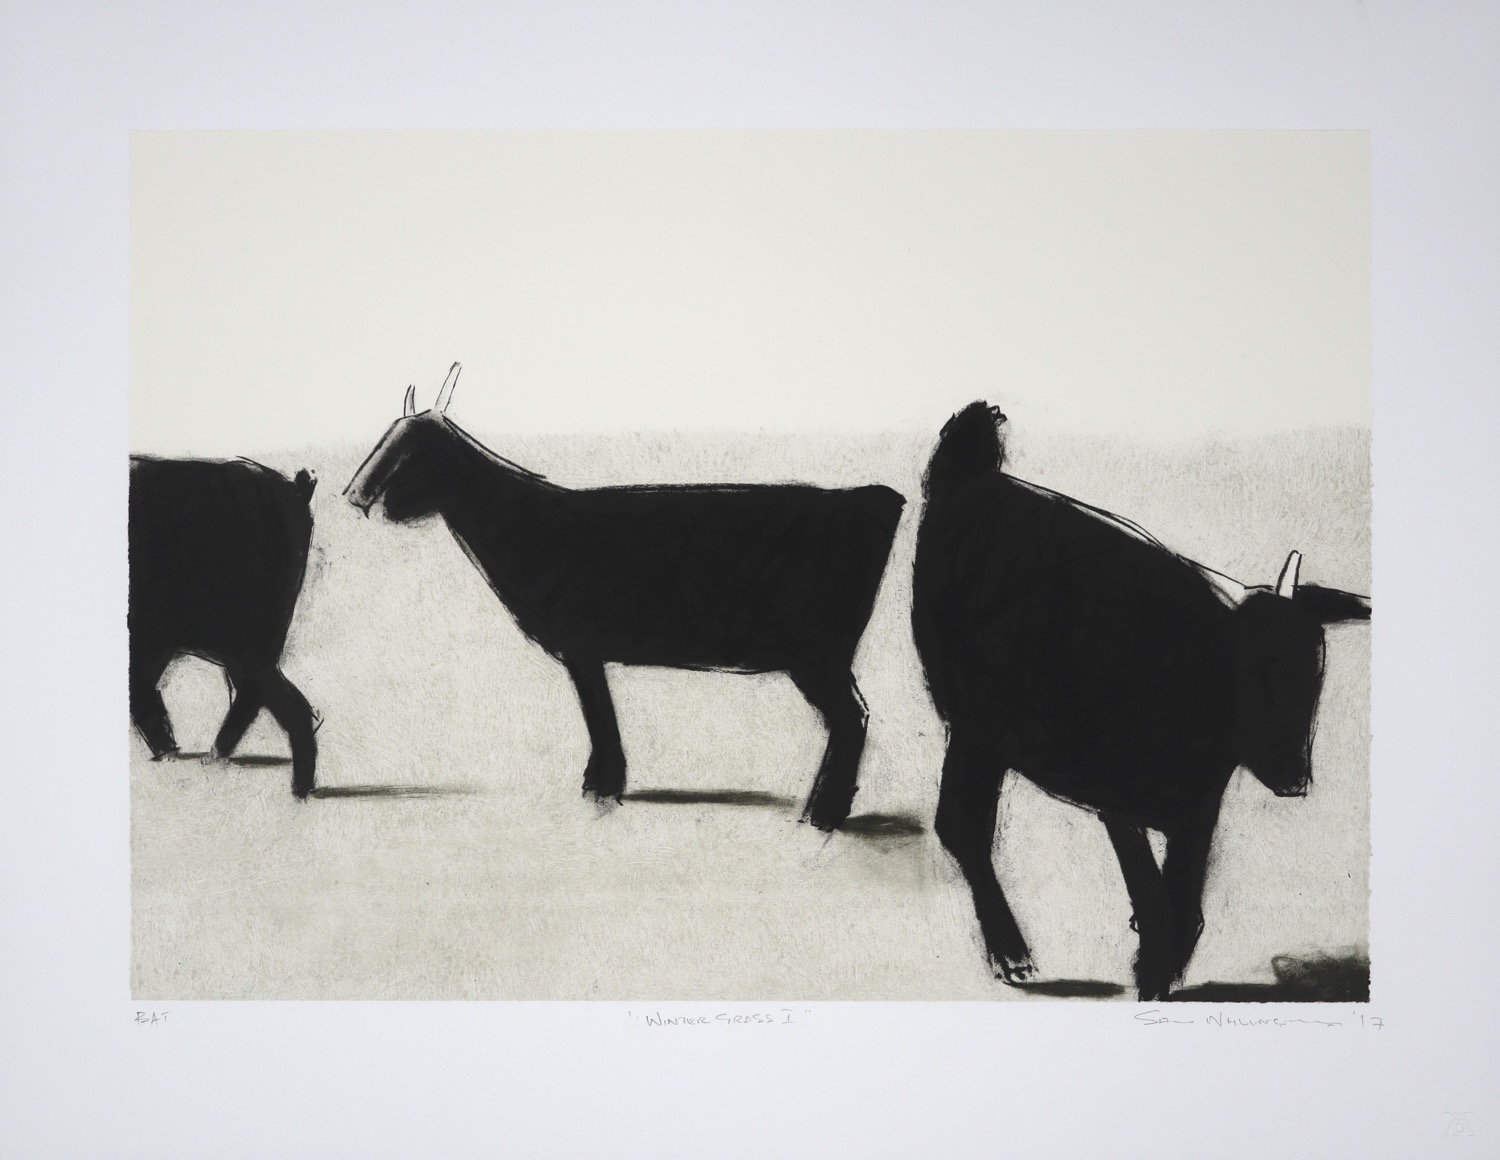 A series of ten prints depicting goats, this is the second series of goat prints that Nhlengethwa has done with us.